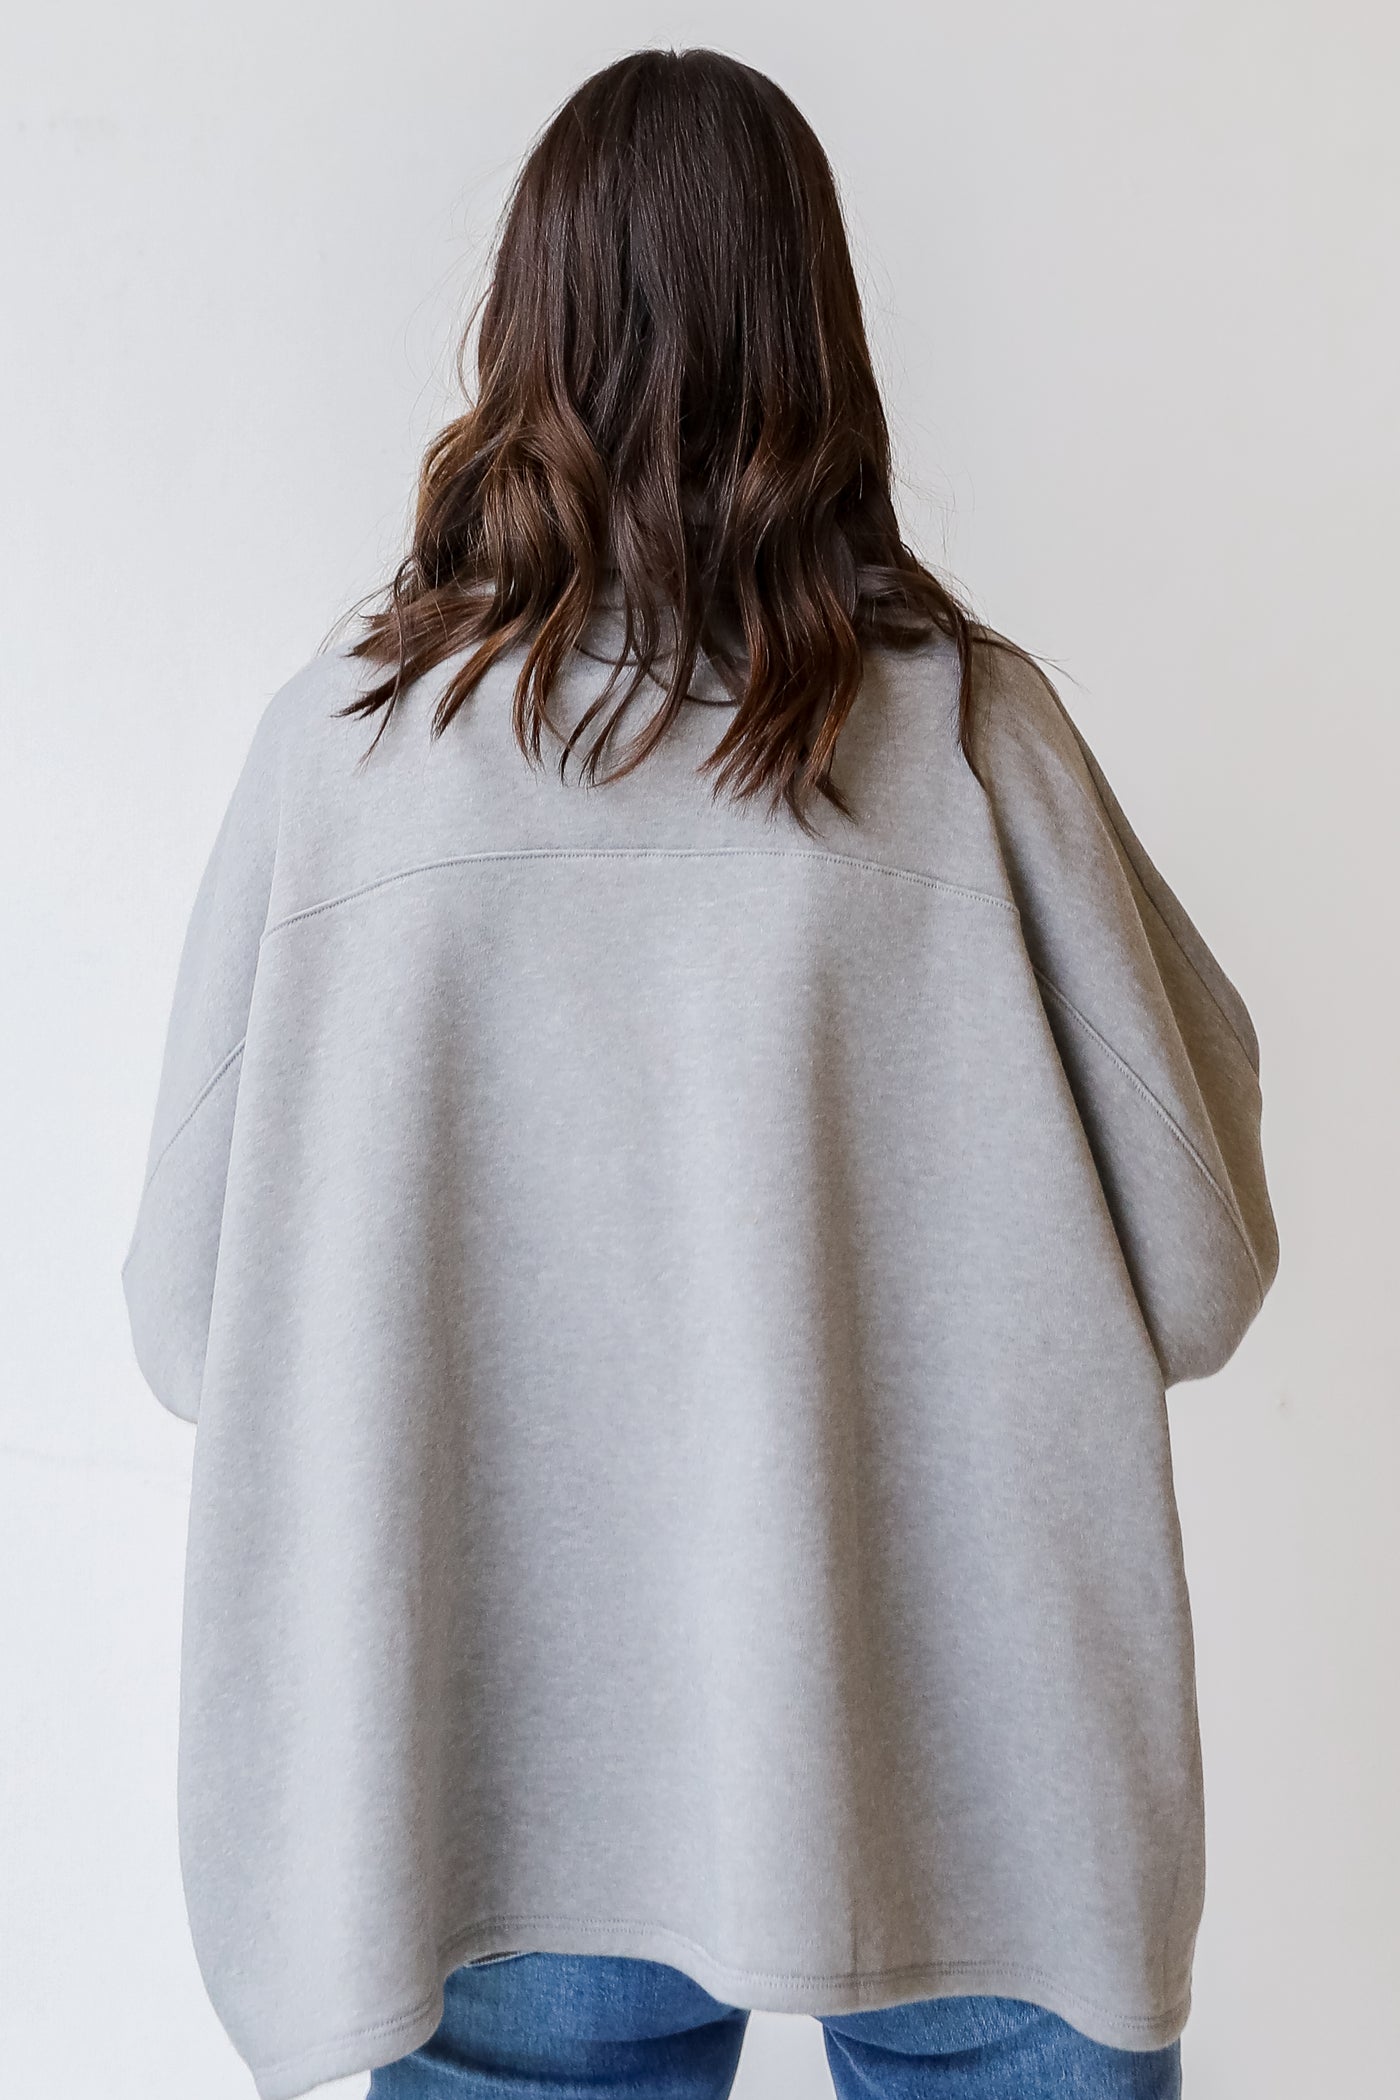 Cowl Neck Pullover in heather grey back view